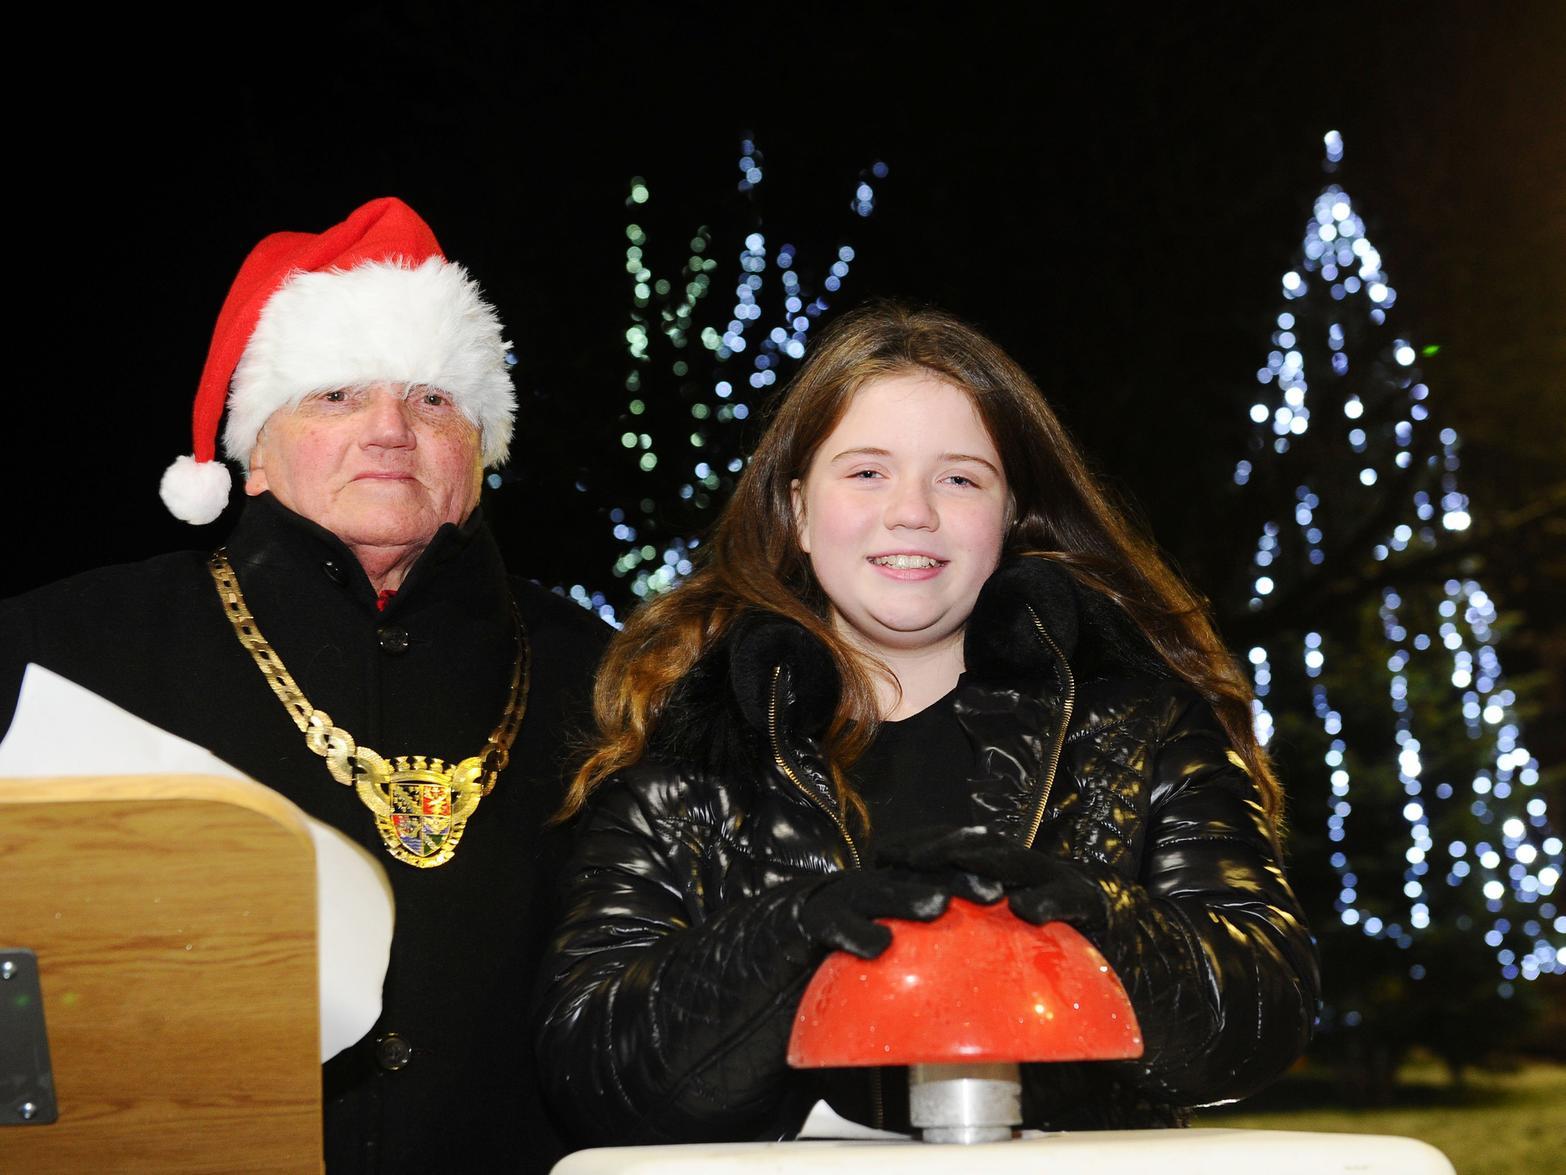 Bonnybridge Christmas lights switch on in the memorial garden on Sunday, December 1. Pushing the button to switch on the lights. Picture by Michael Gillen.